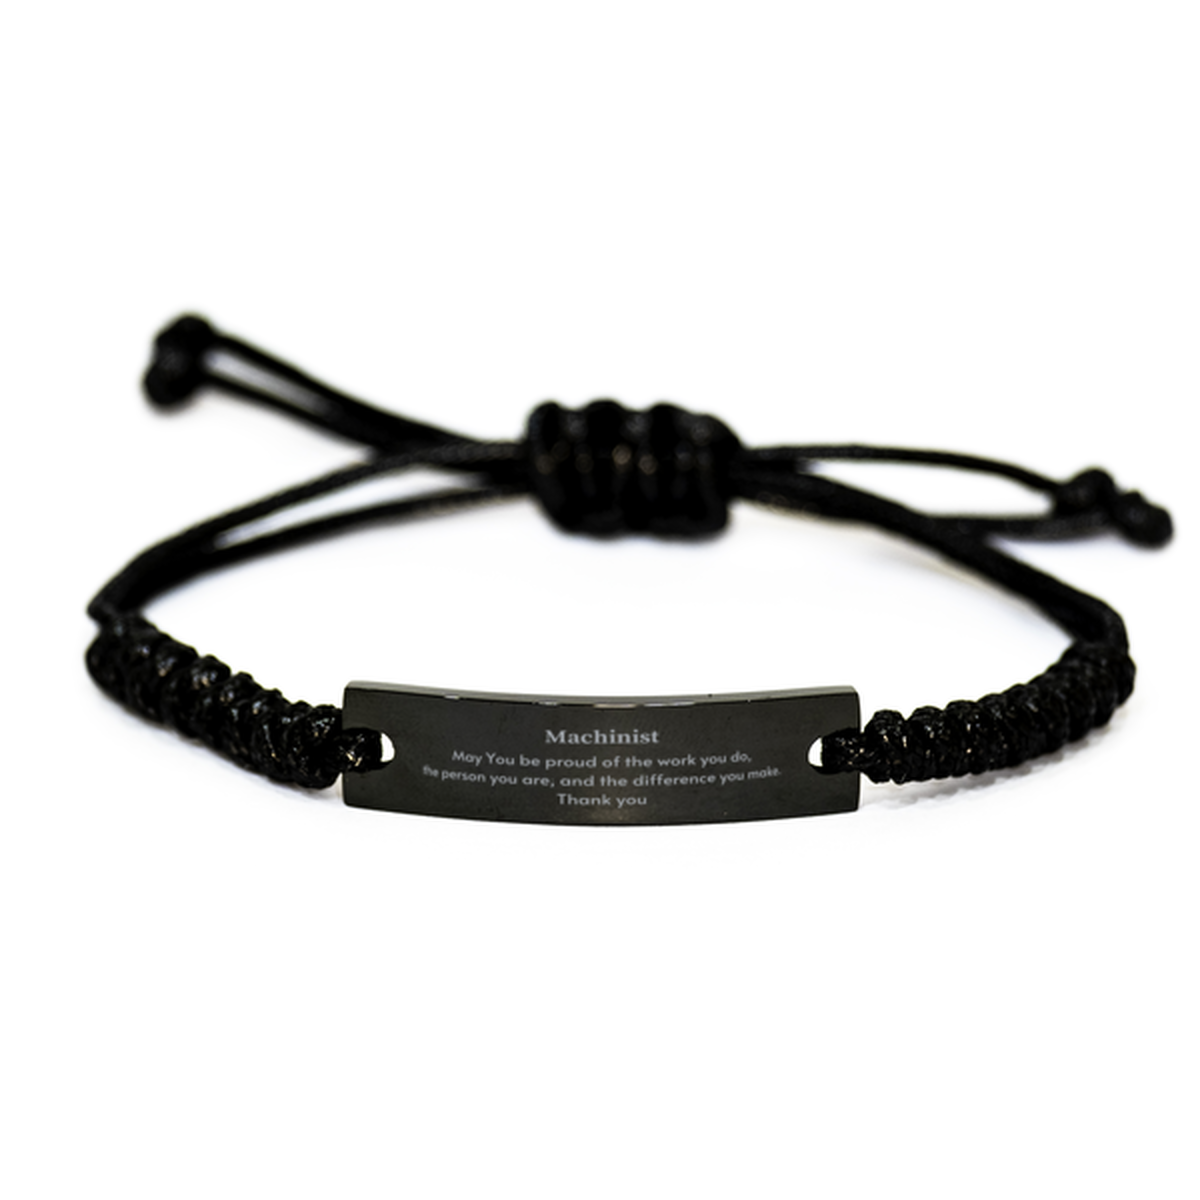 Heartwarming Black Rope Bracelet Retirement Coworkers Gifts for Machinist, Machinist May You be proud of the work you do, the person you are Gifts for Boss Men Women Friends